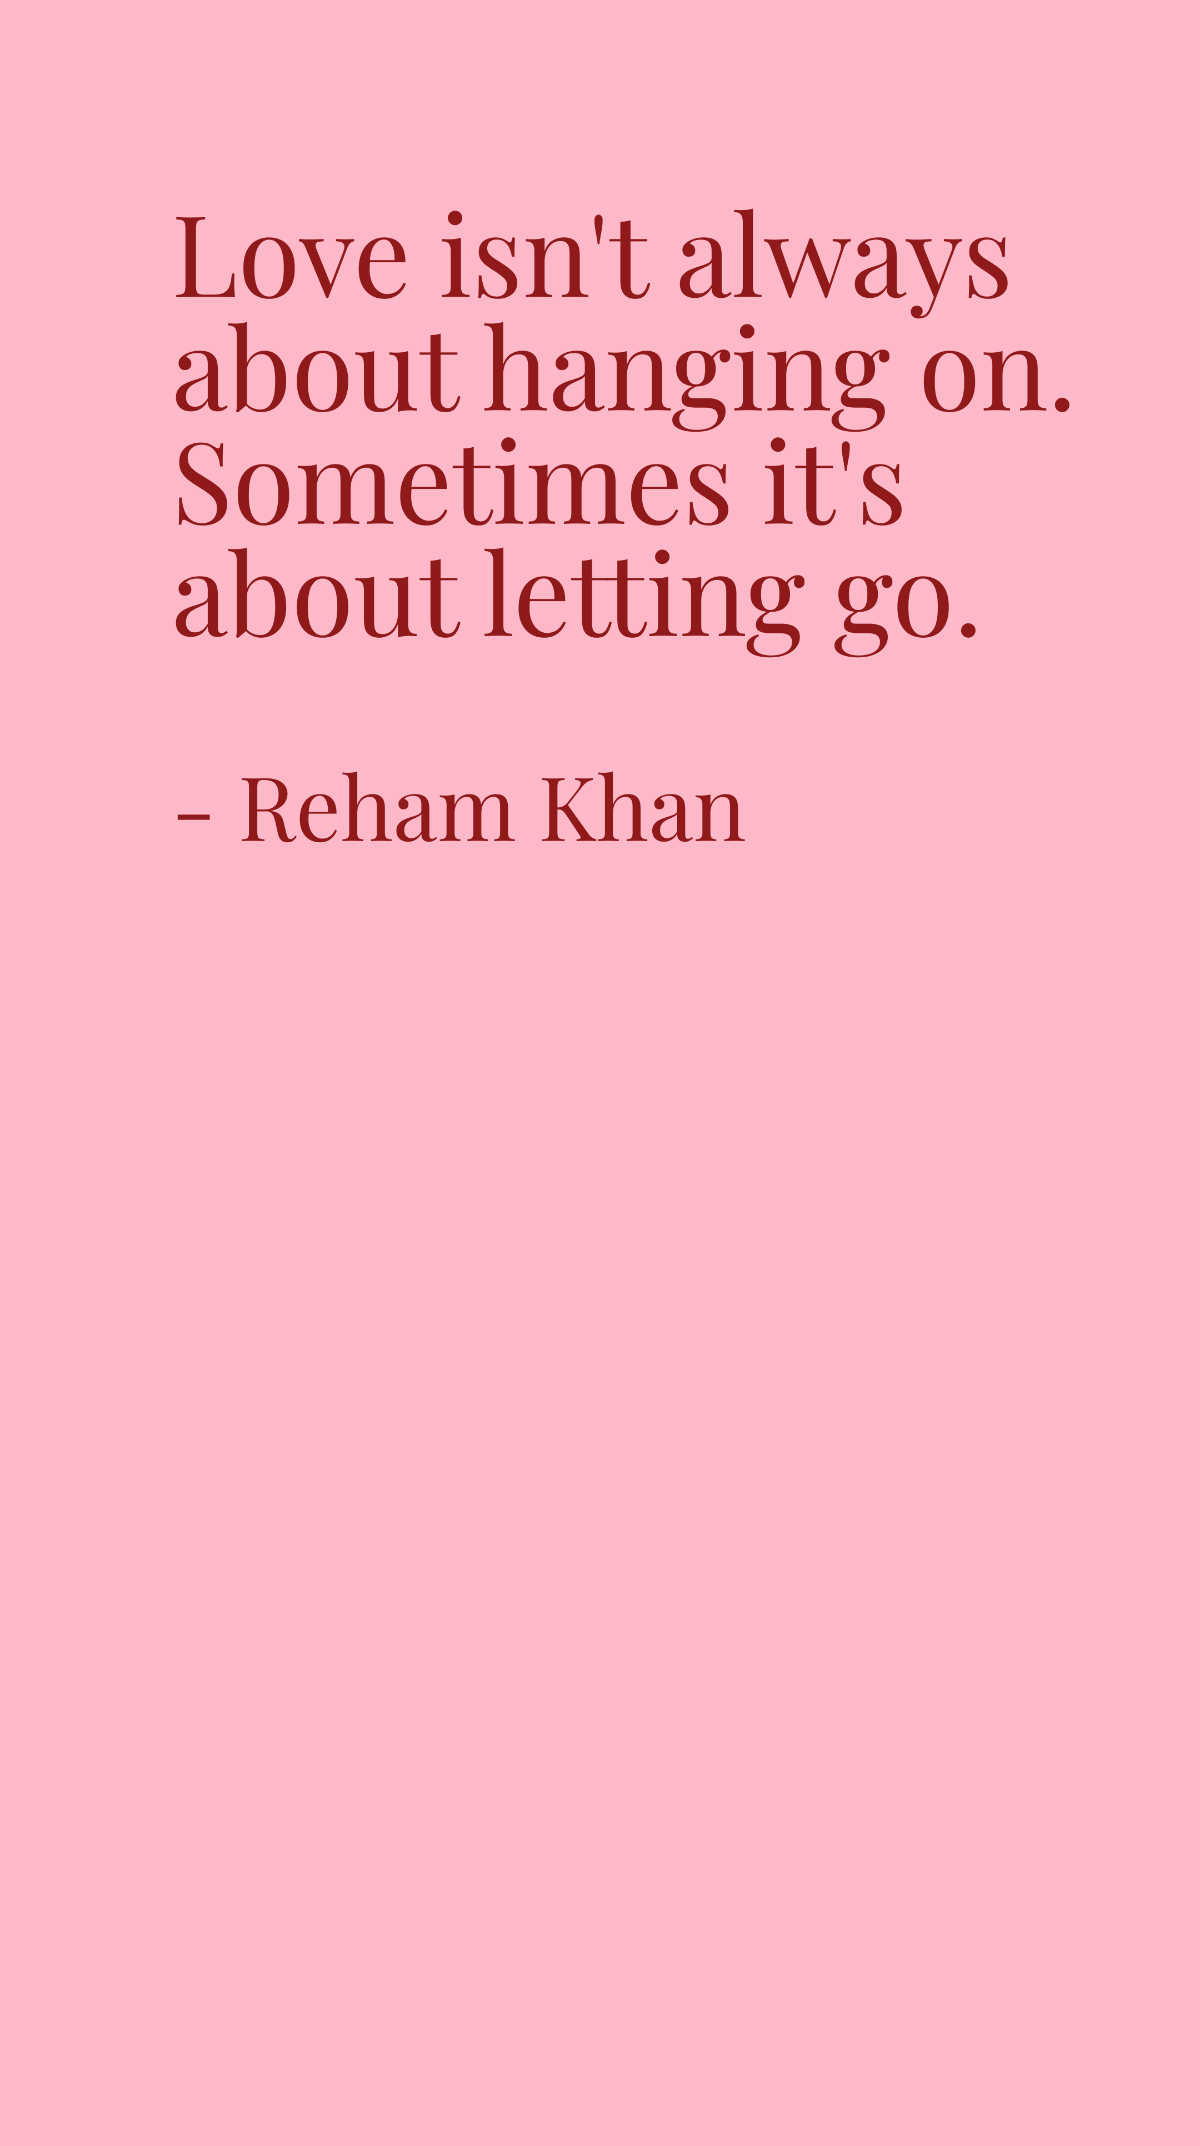 Reham Khan - Love isn't always about hanging on. Sometimes it's about letting go. Template